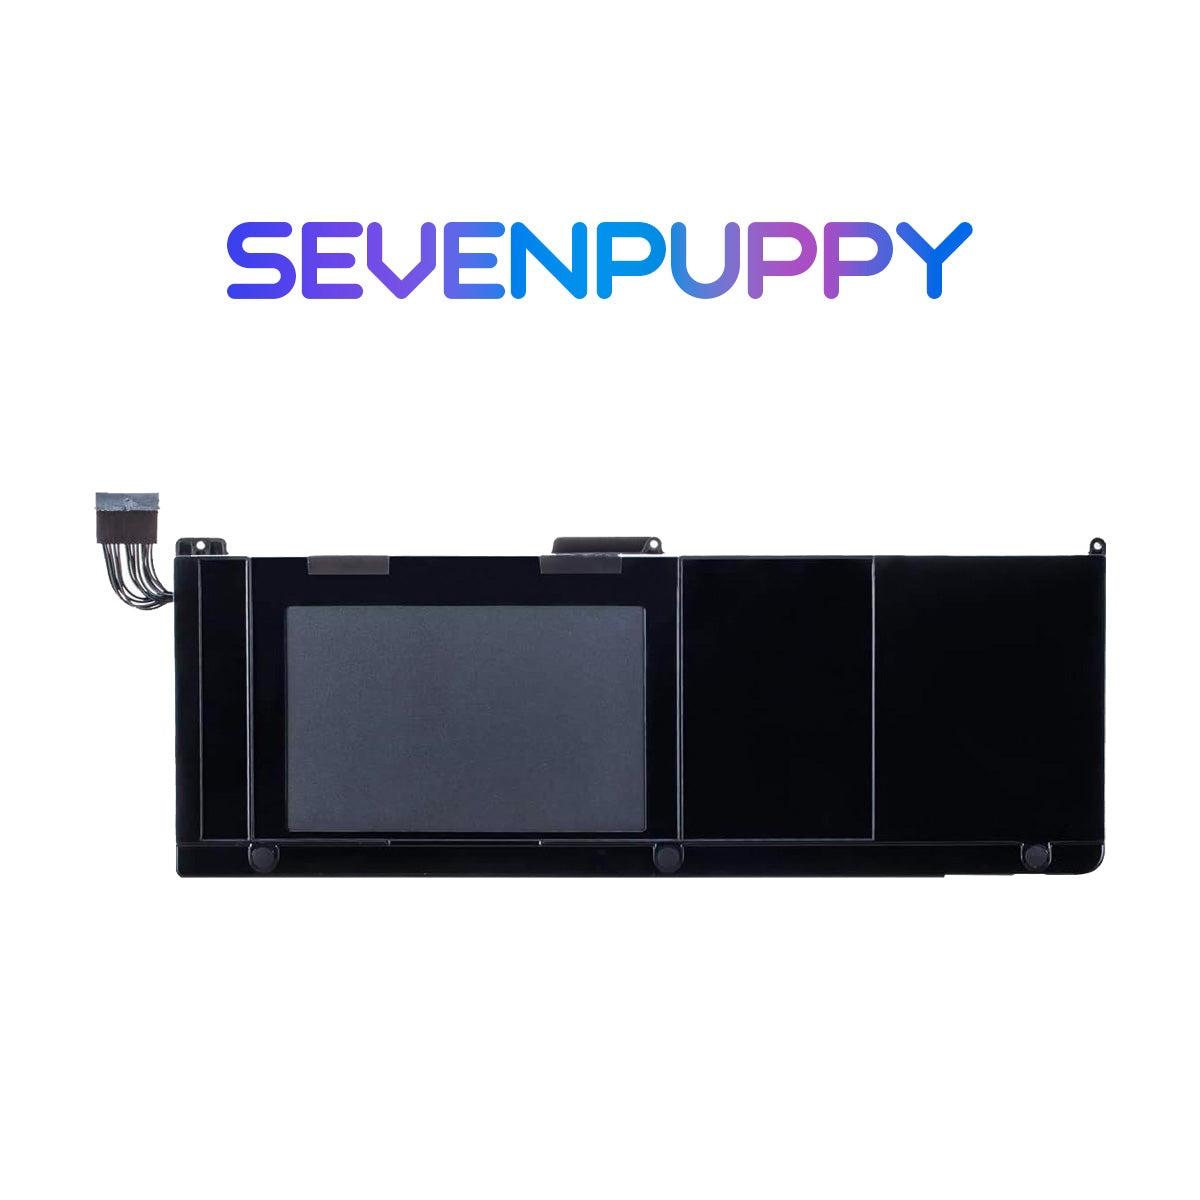 SEVEN PUPPY Brand NEW For Macbook Pro 17" A1309 A1297 2008-2010 Year Laptop Battery